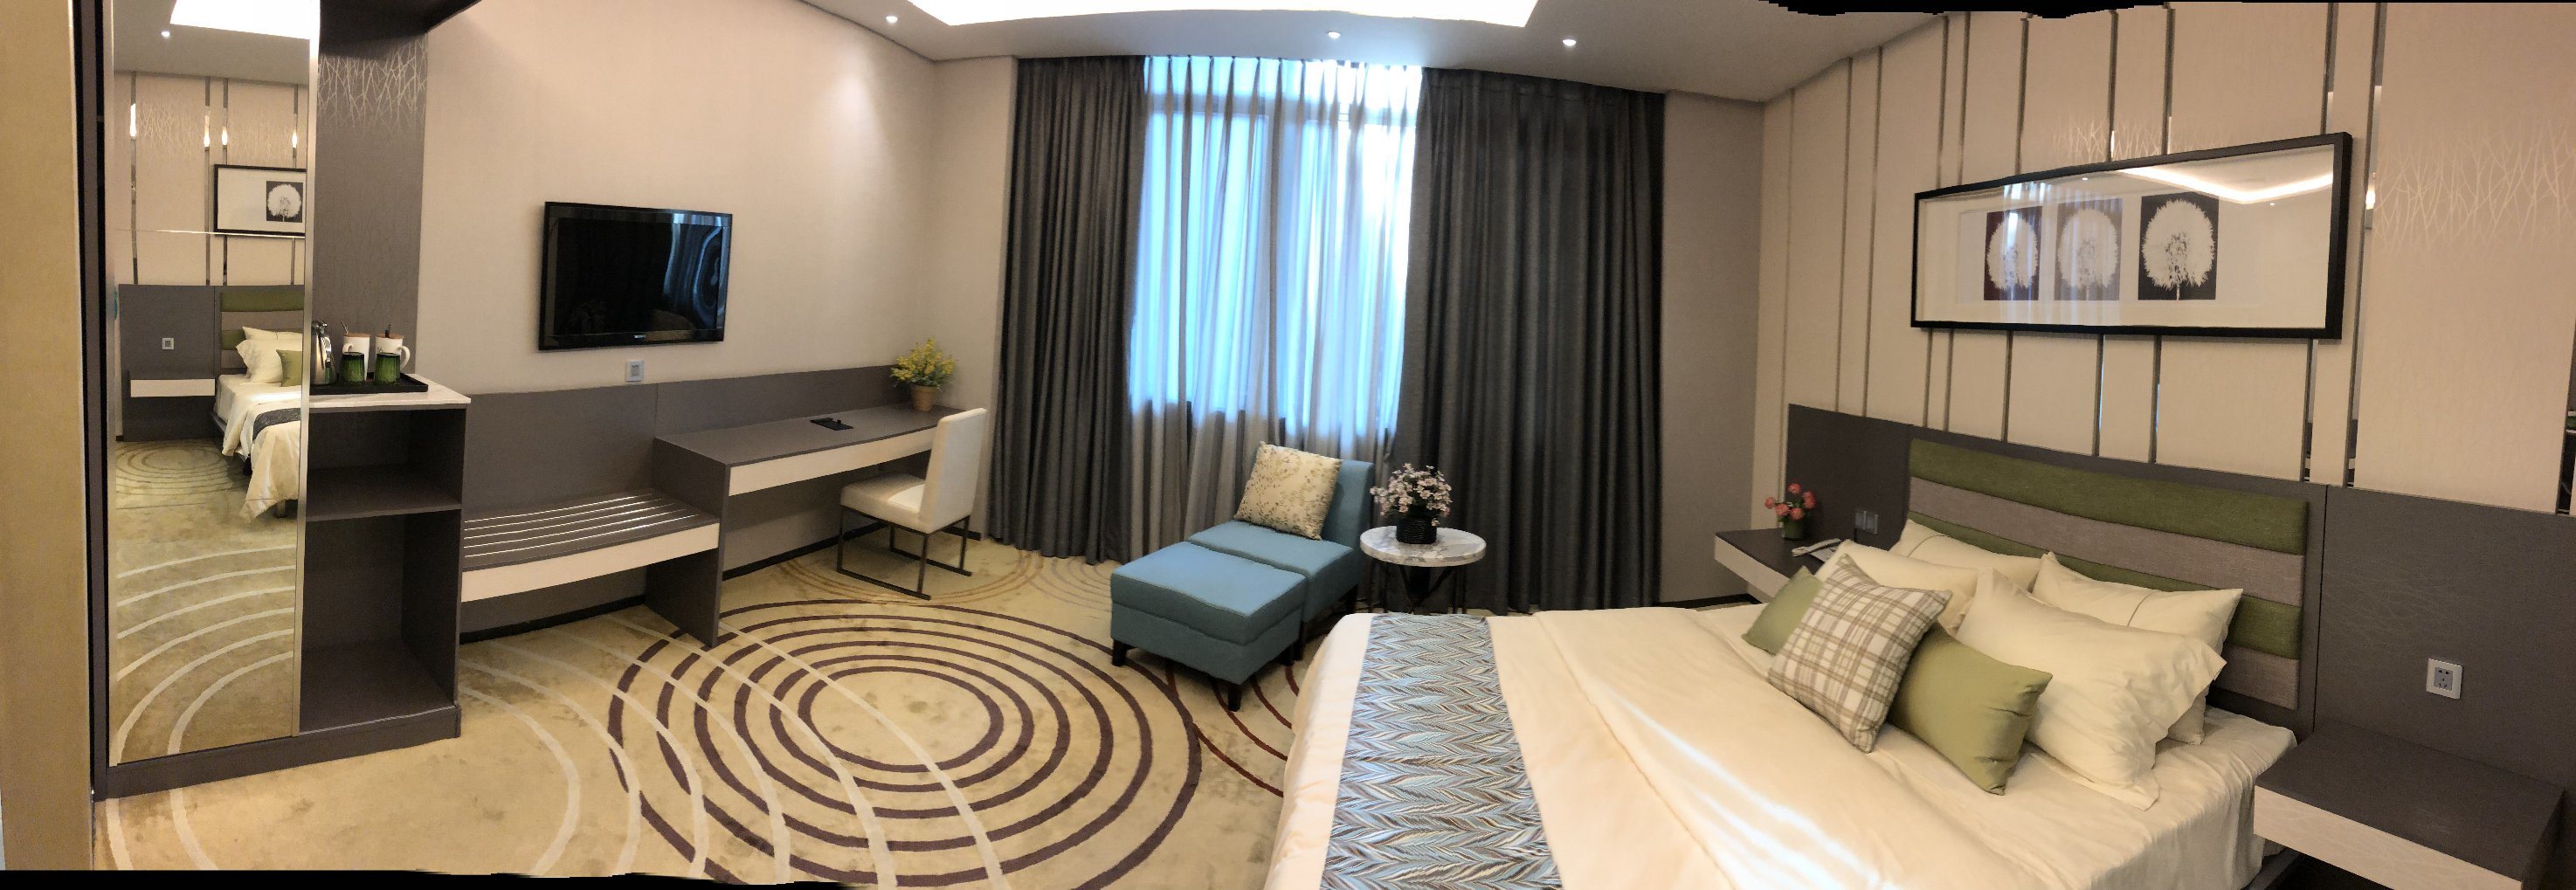 Custom Made Luxury Foshan Guangdong Hotel Furniture for Sale